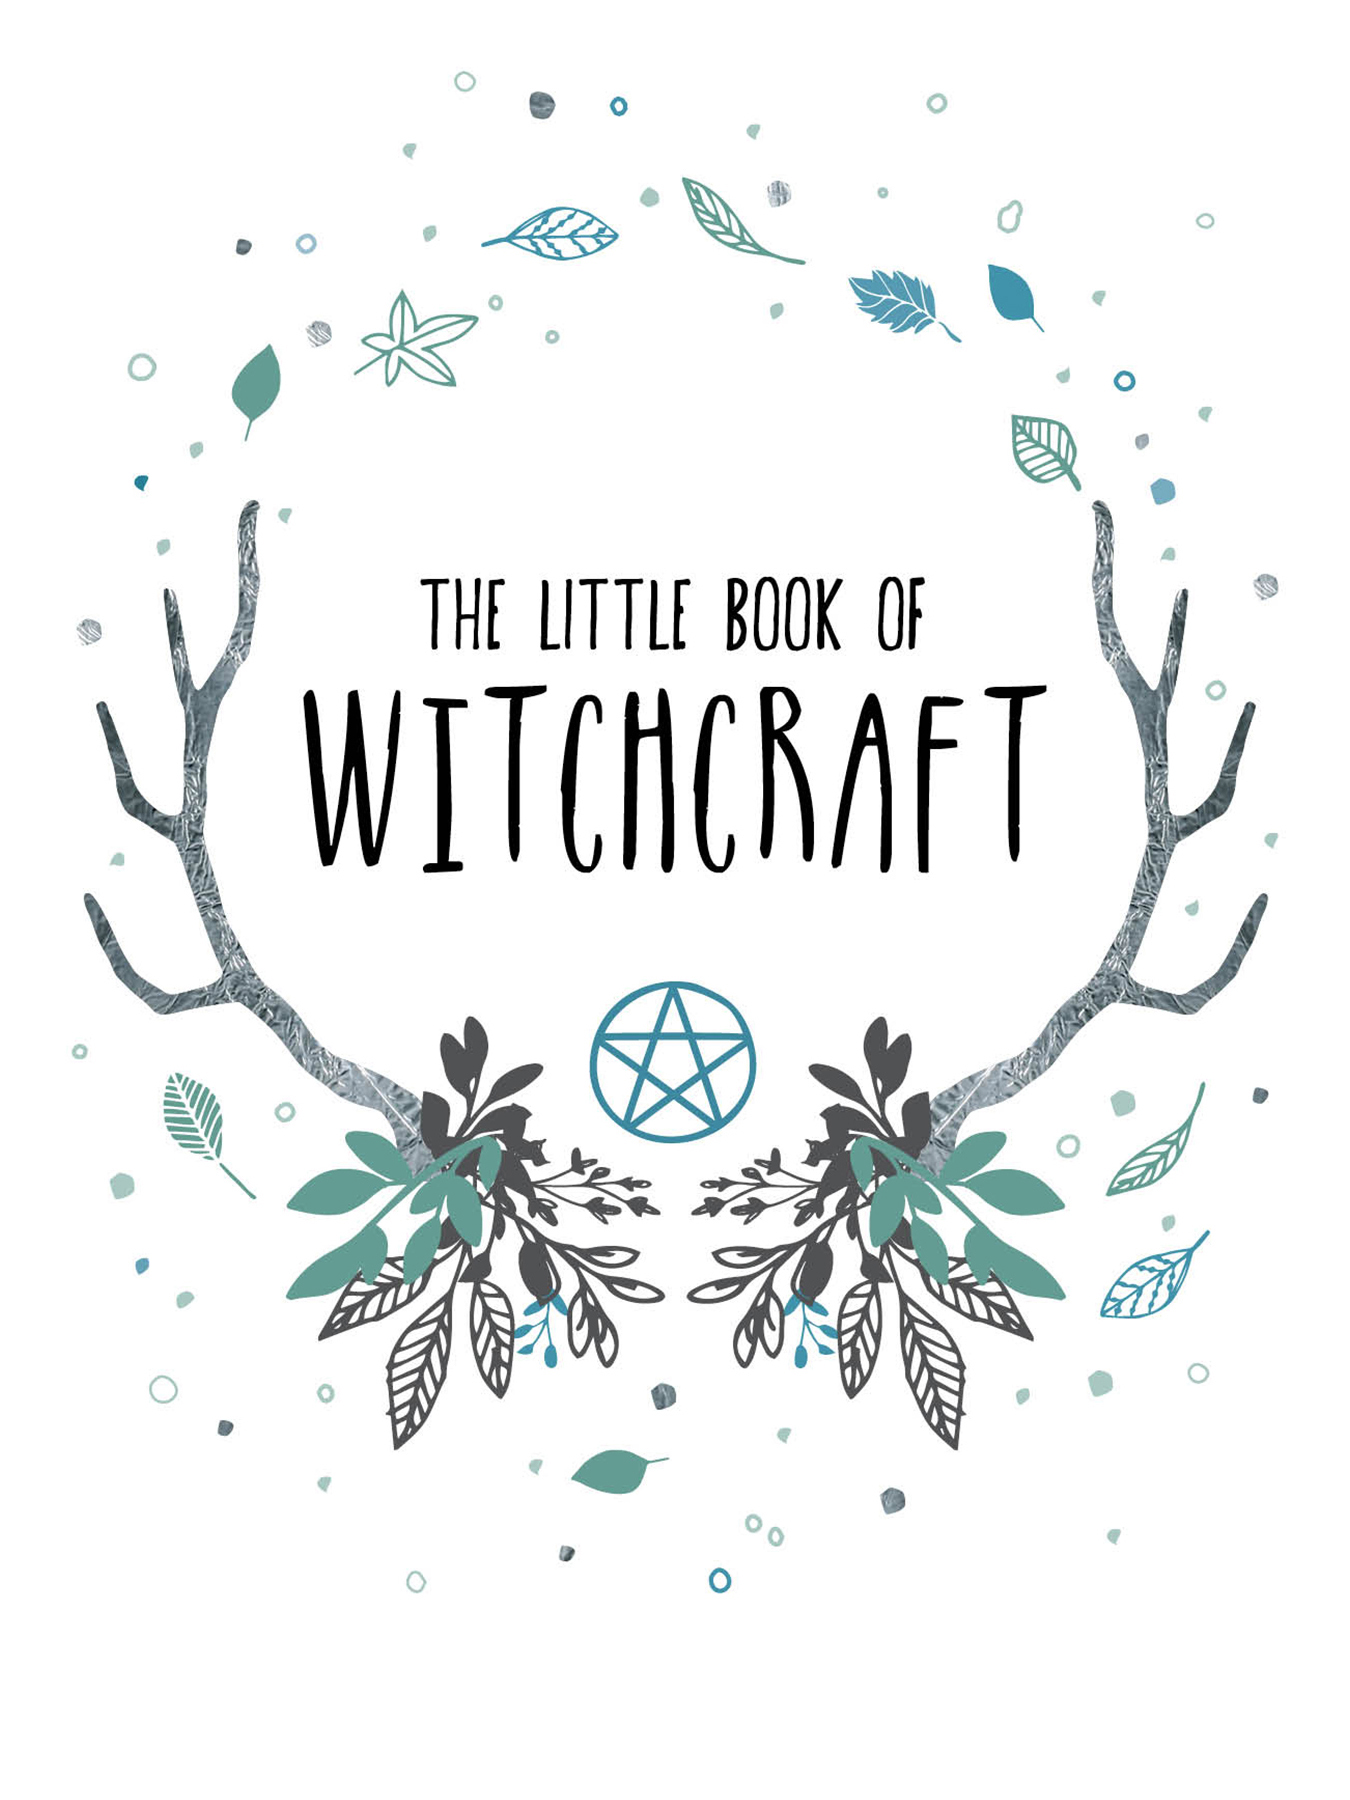 The Little Book of Witchcraft copyright 2018 by Summersdale Publishers Ltd - photo 1